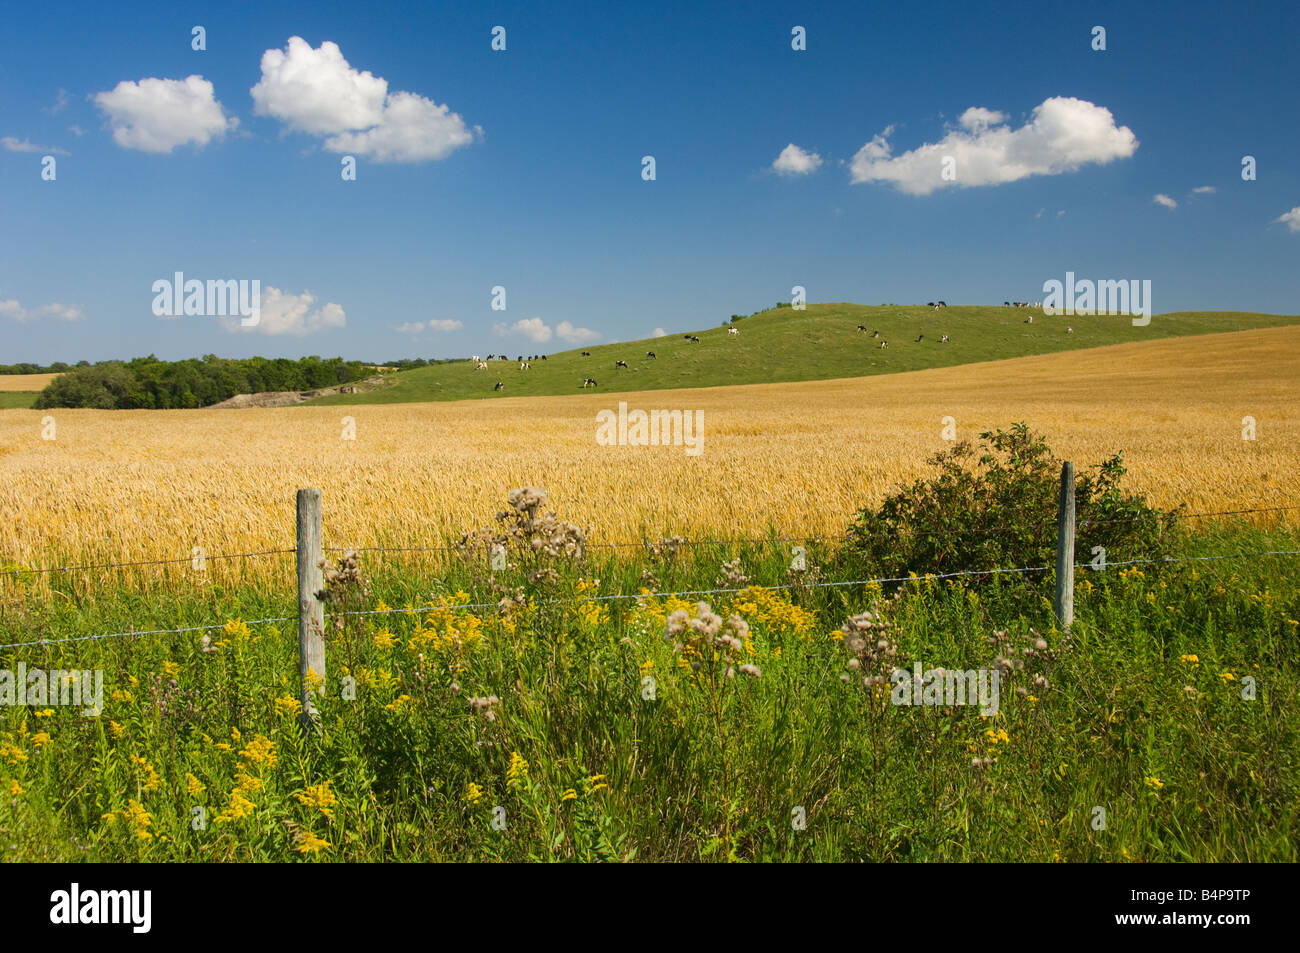 A field of ripe wheat with cows grazing on a hillside near Holland, Manitoba, Canada Stock Photo